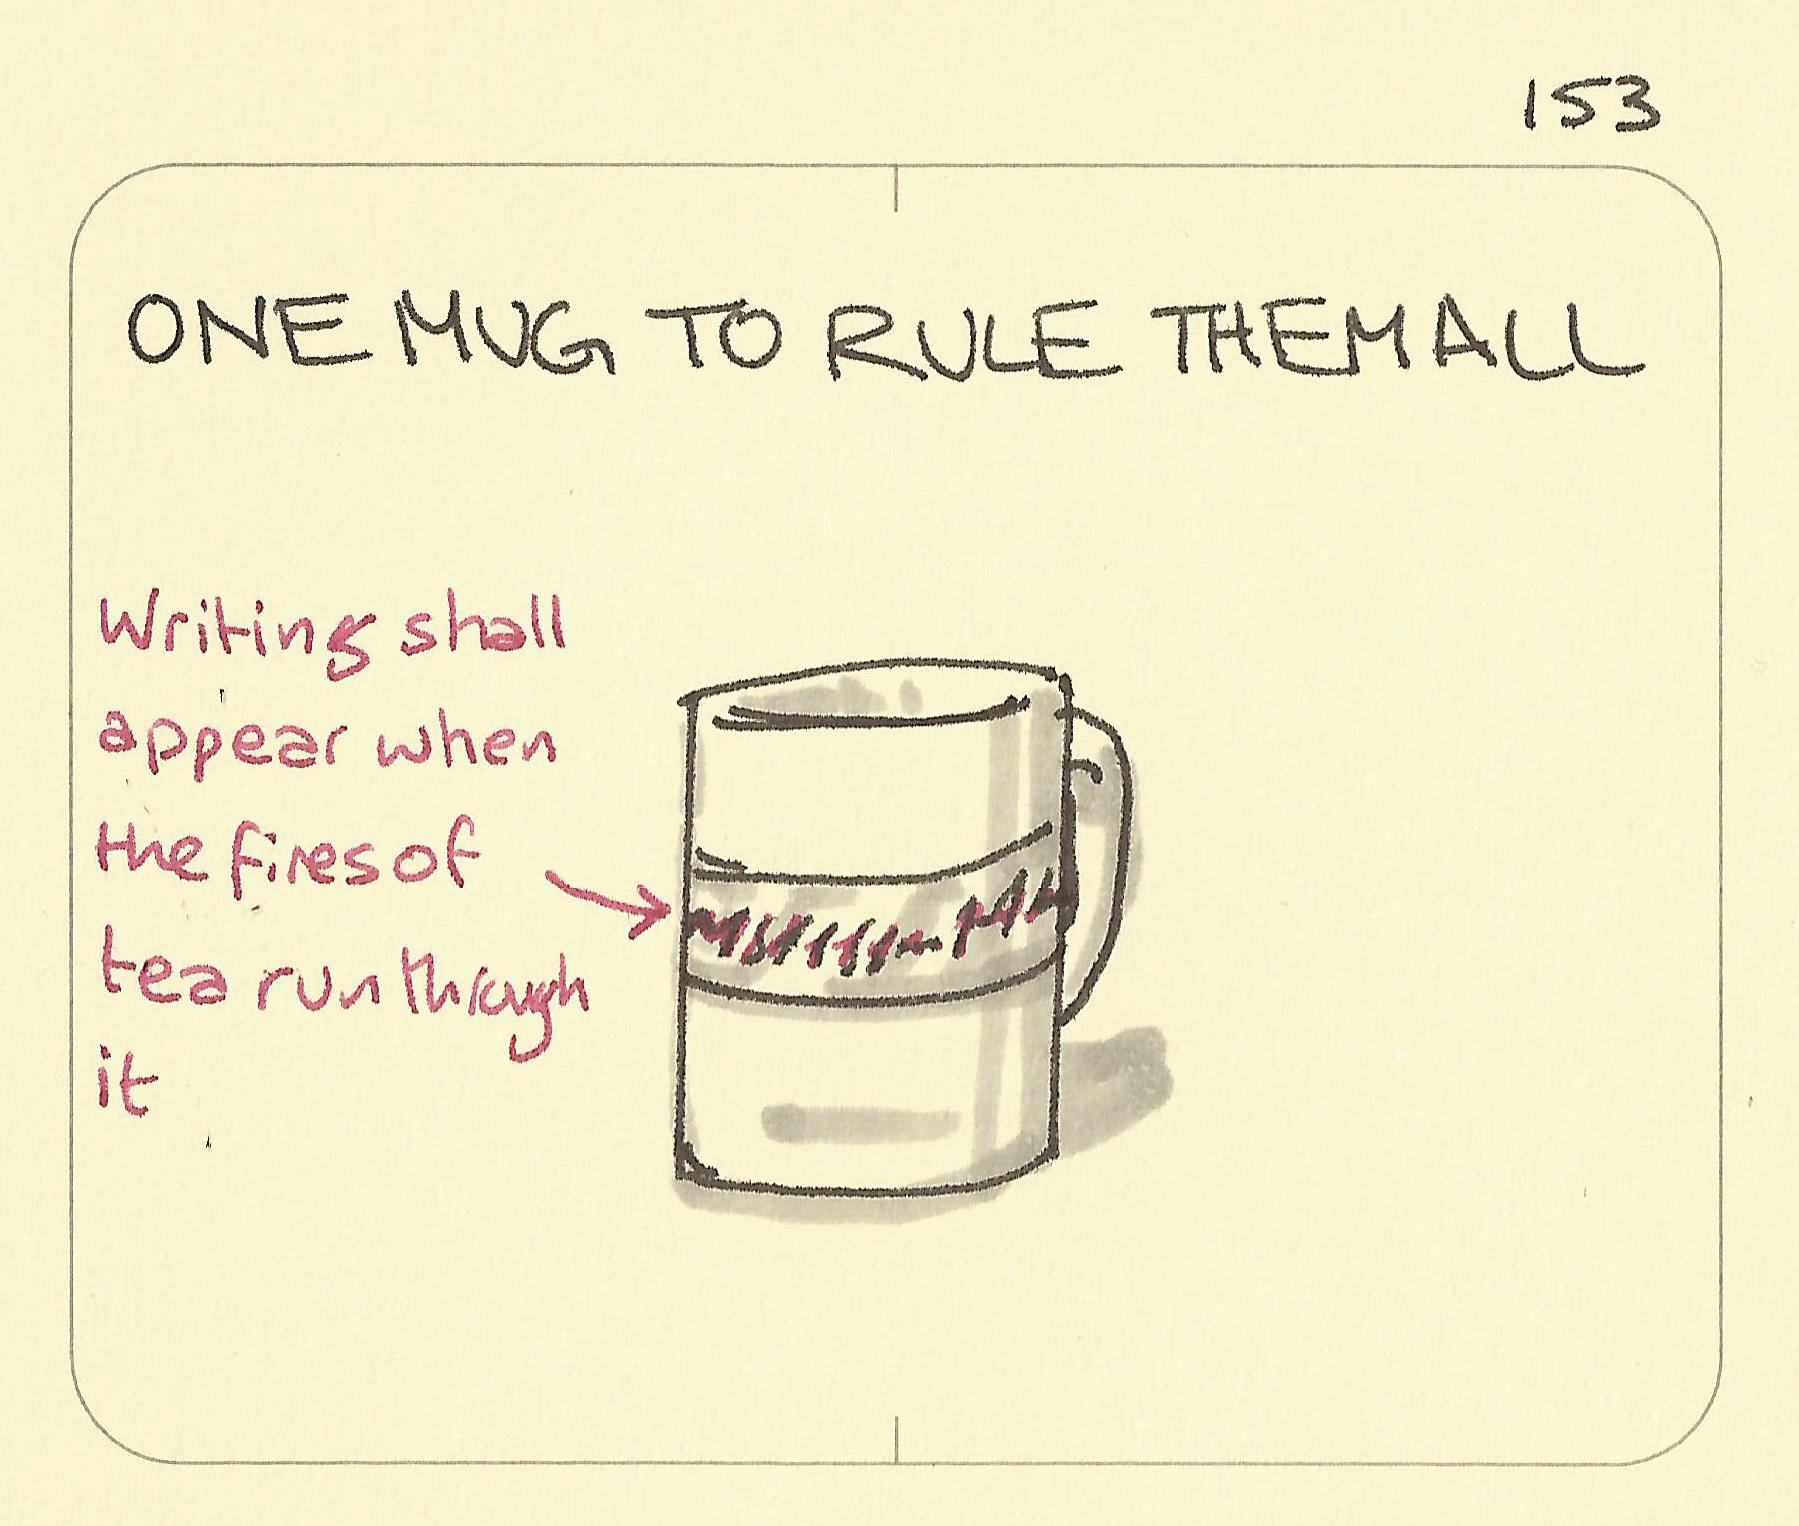 One mug to rule them all - Sketchplanations